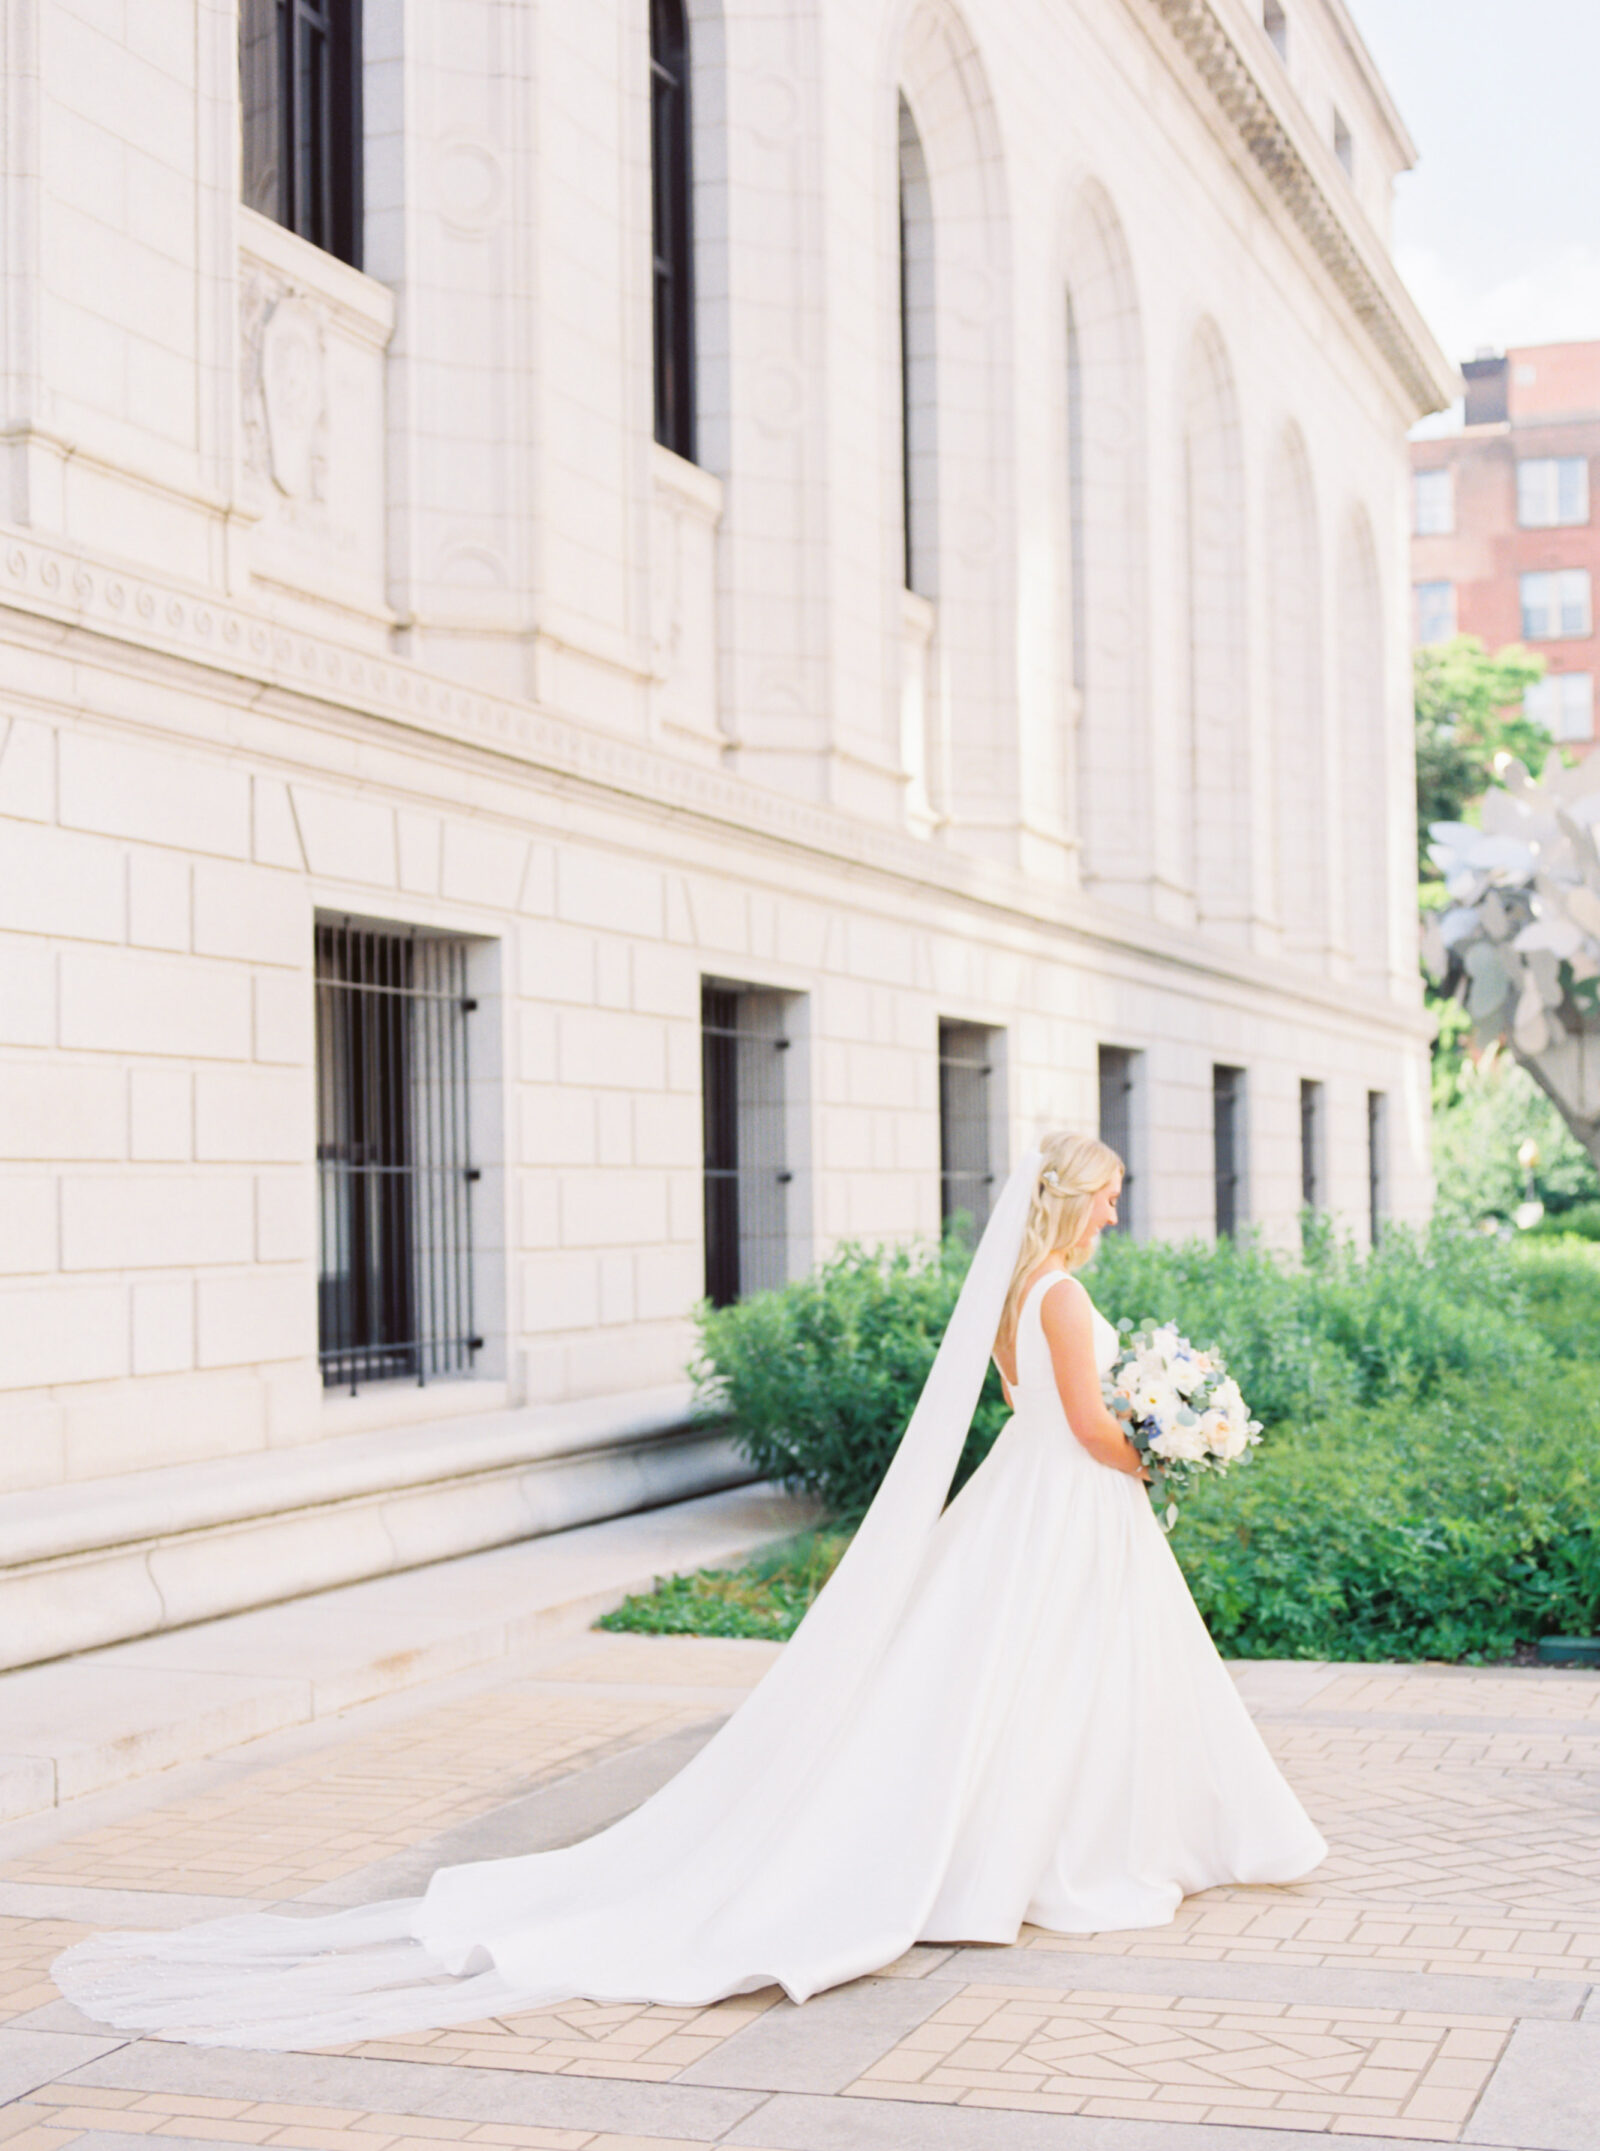 St Louis spring wedding photos on film at the Central Library